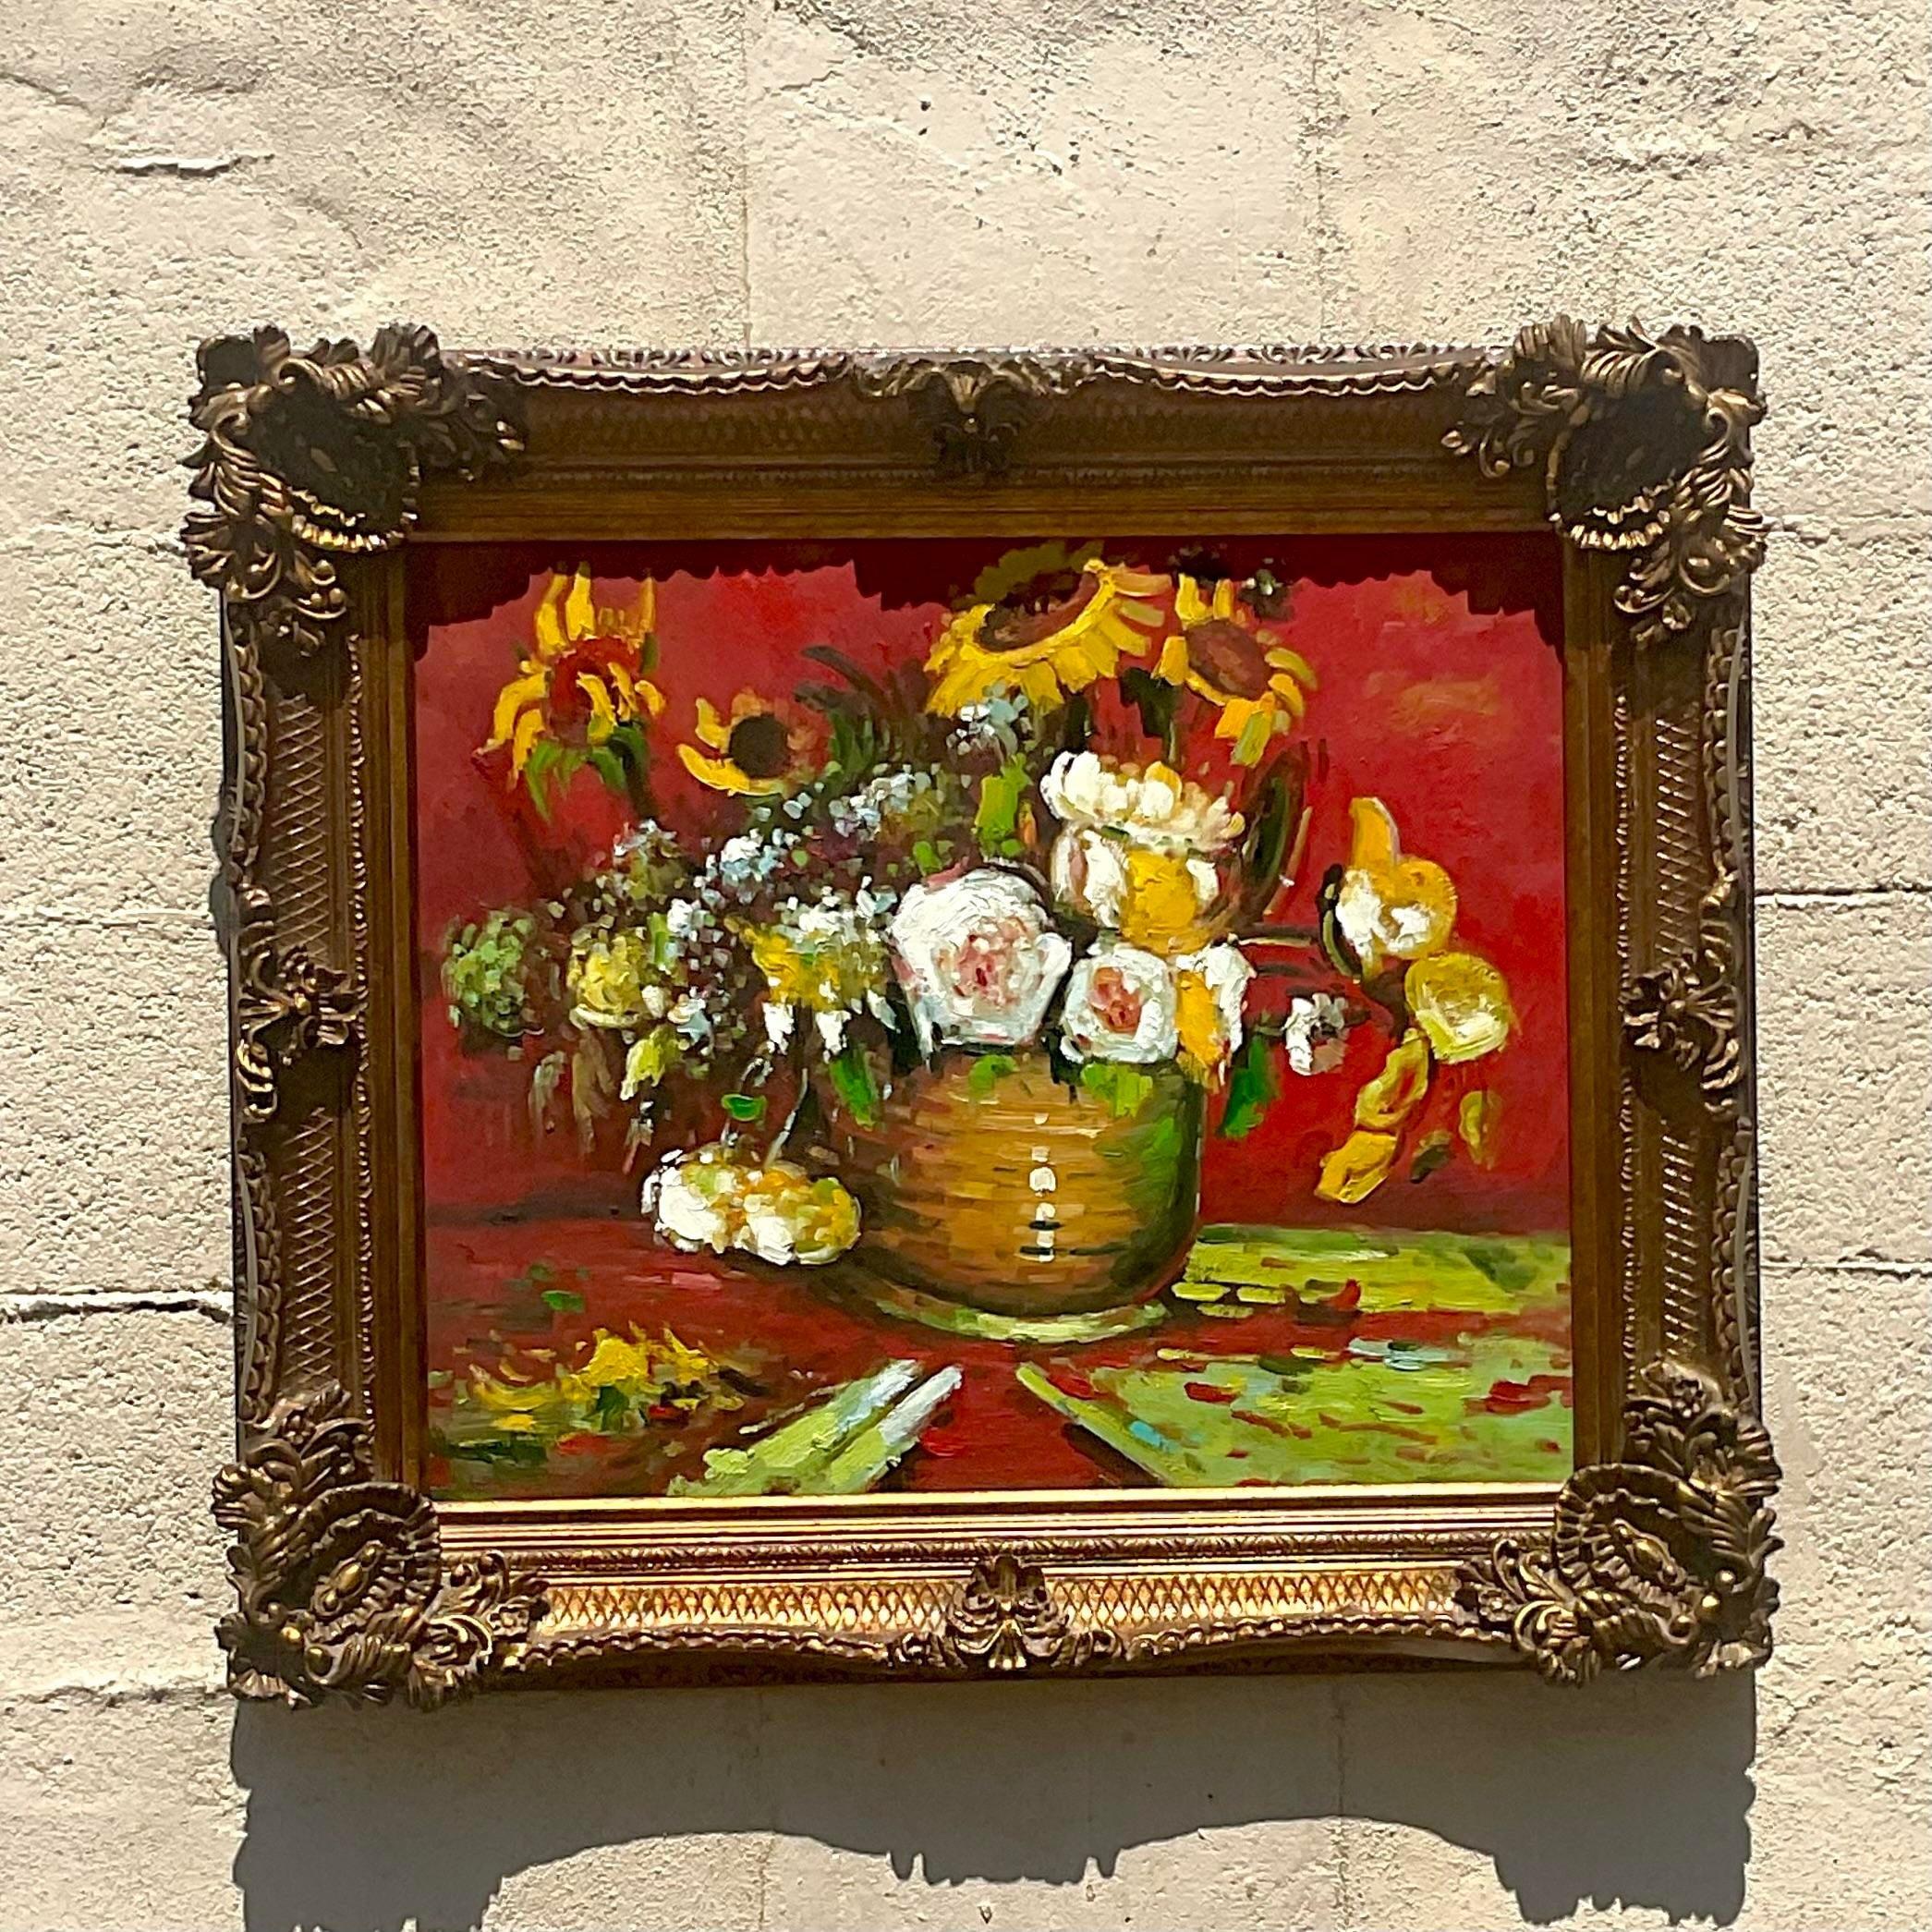 A fabulous vintage Regency original oil painting. A chic floral composition in a thick painterly style. Signed by the artist. Acquired from a Palm Beach estate.